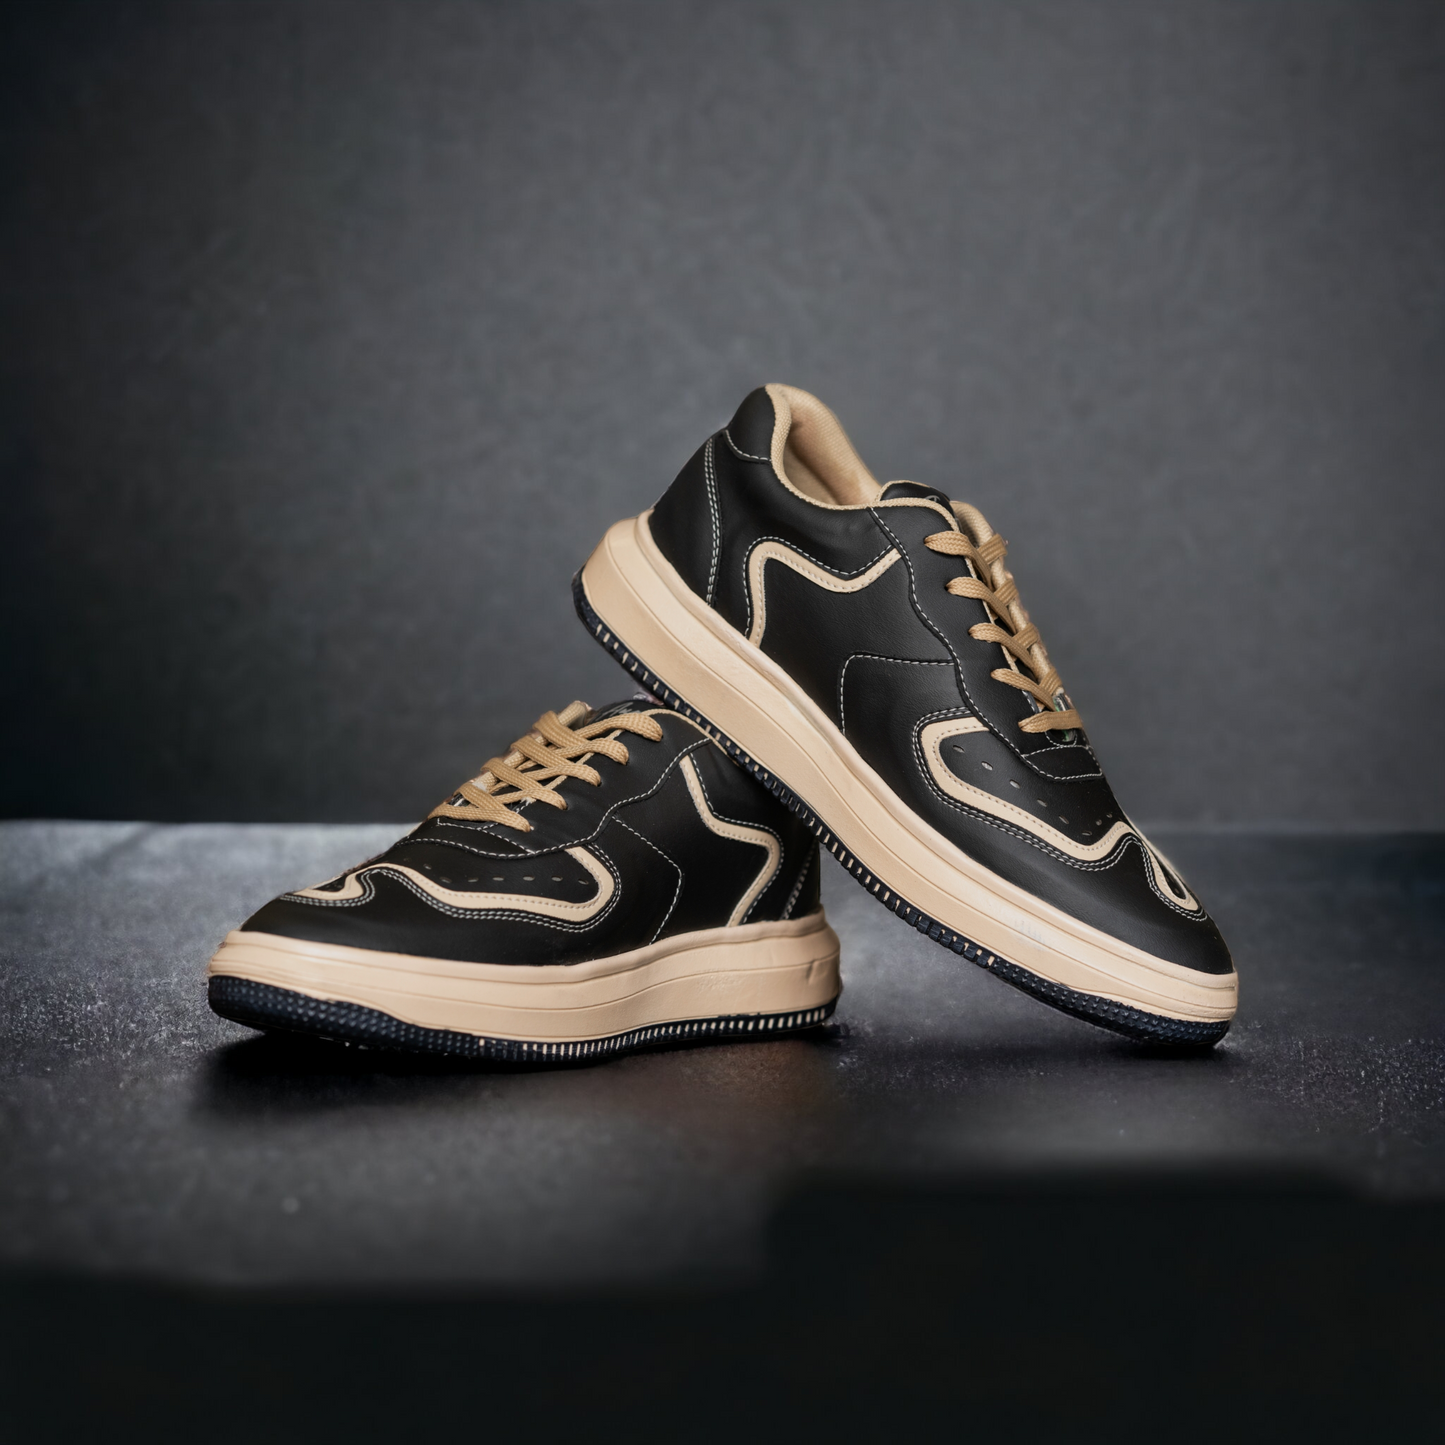 The Aurous Matteo Laceup Sneakers